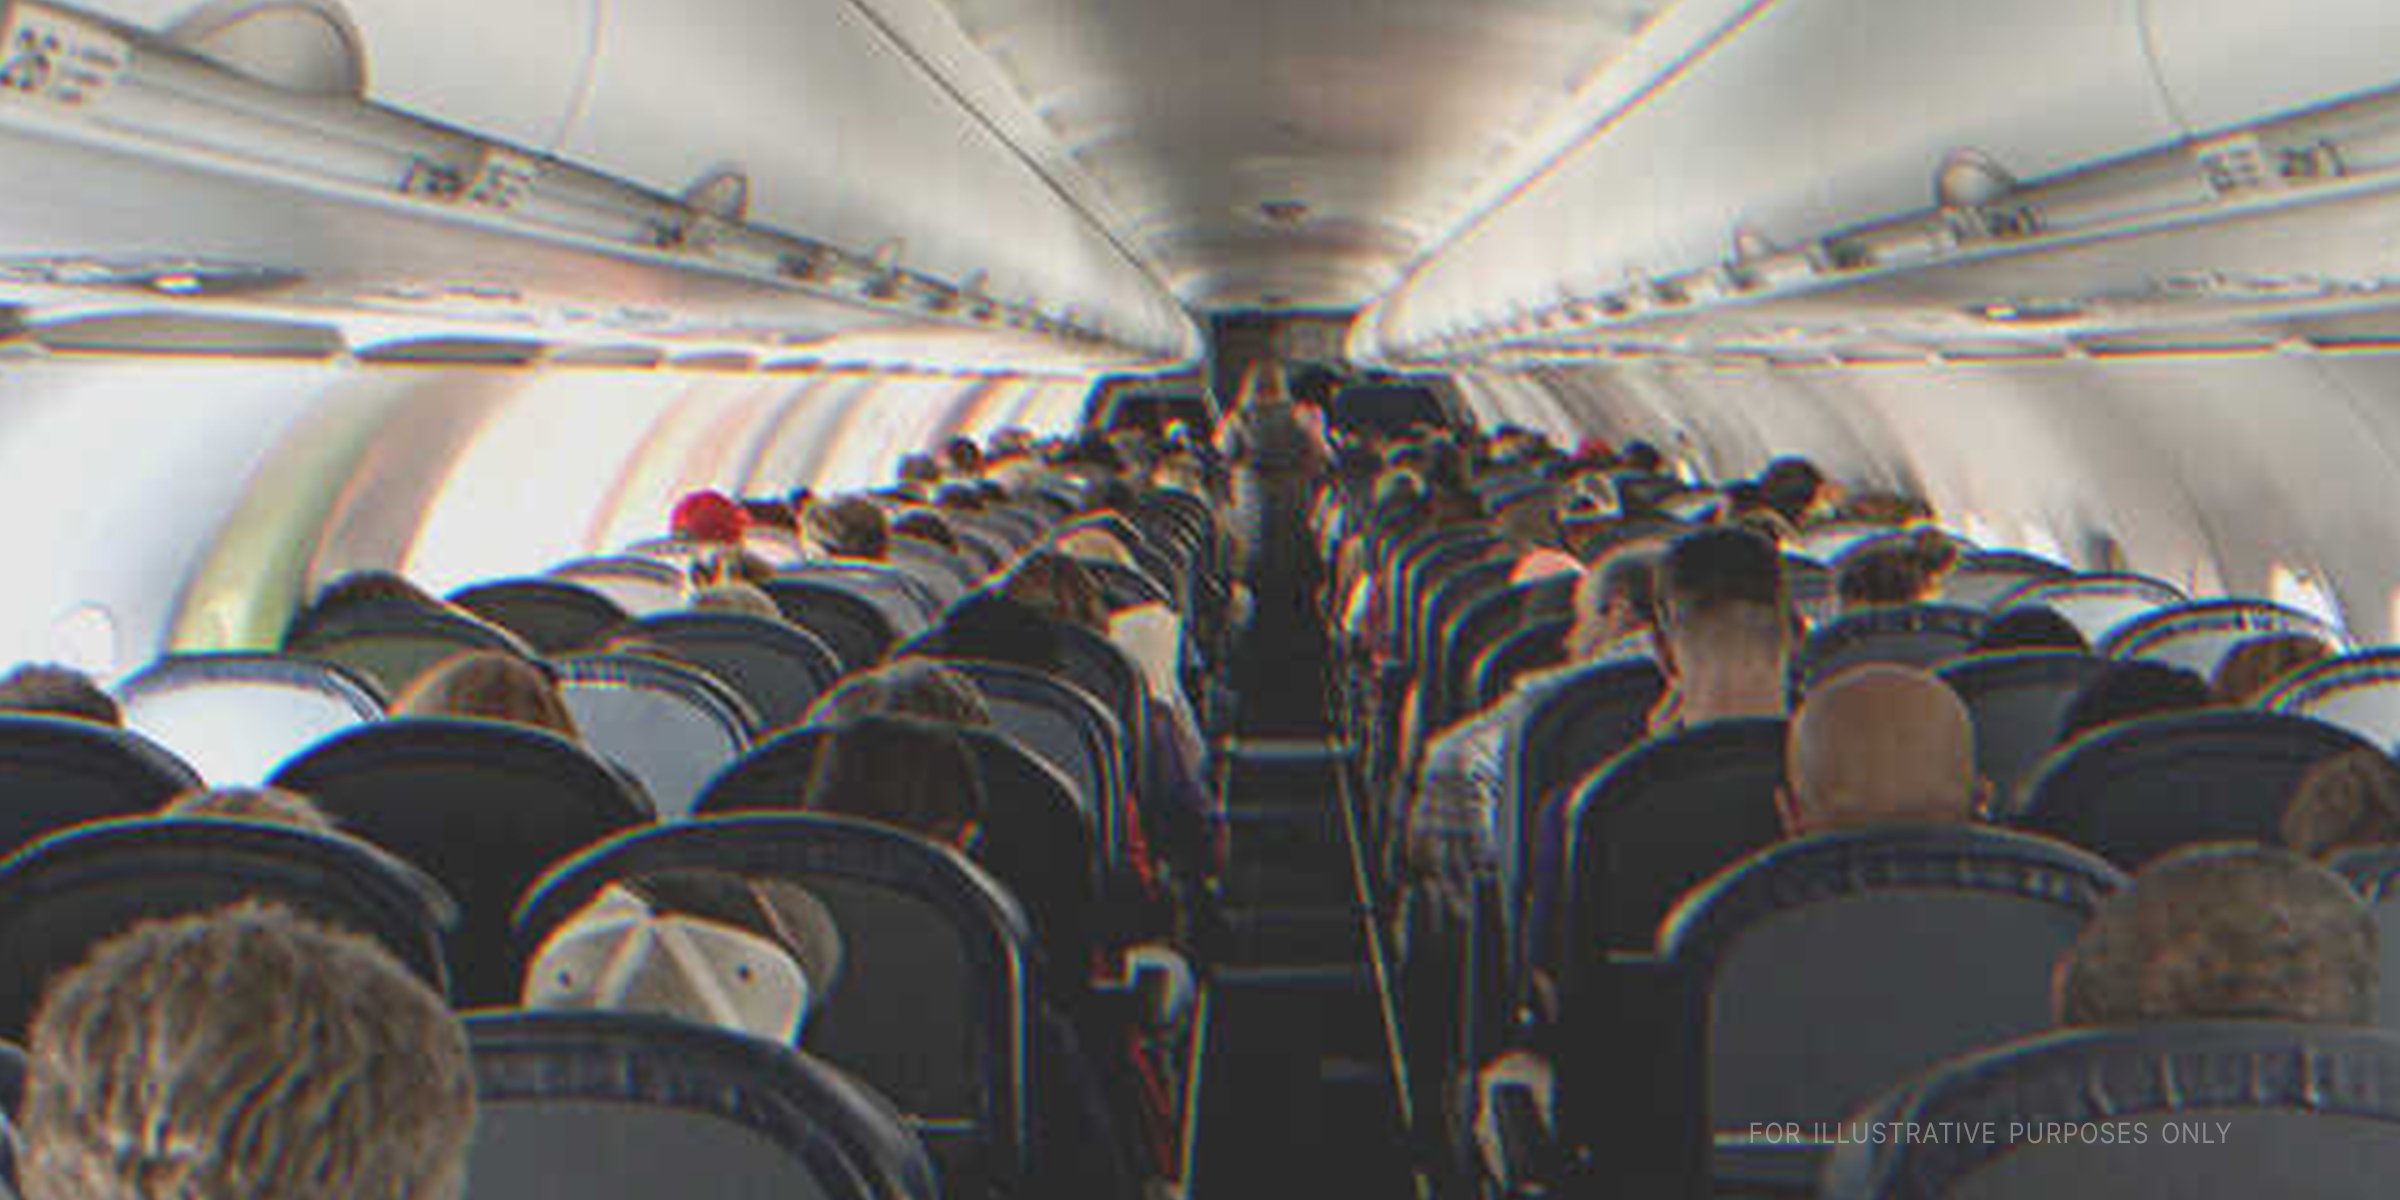 Passengers on a flight | Source: Getty Images